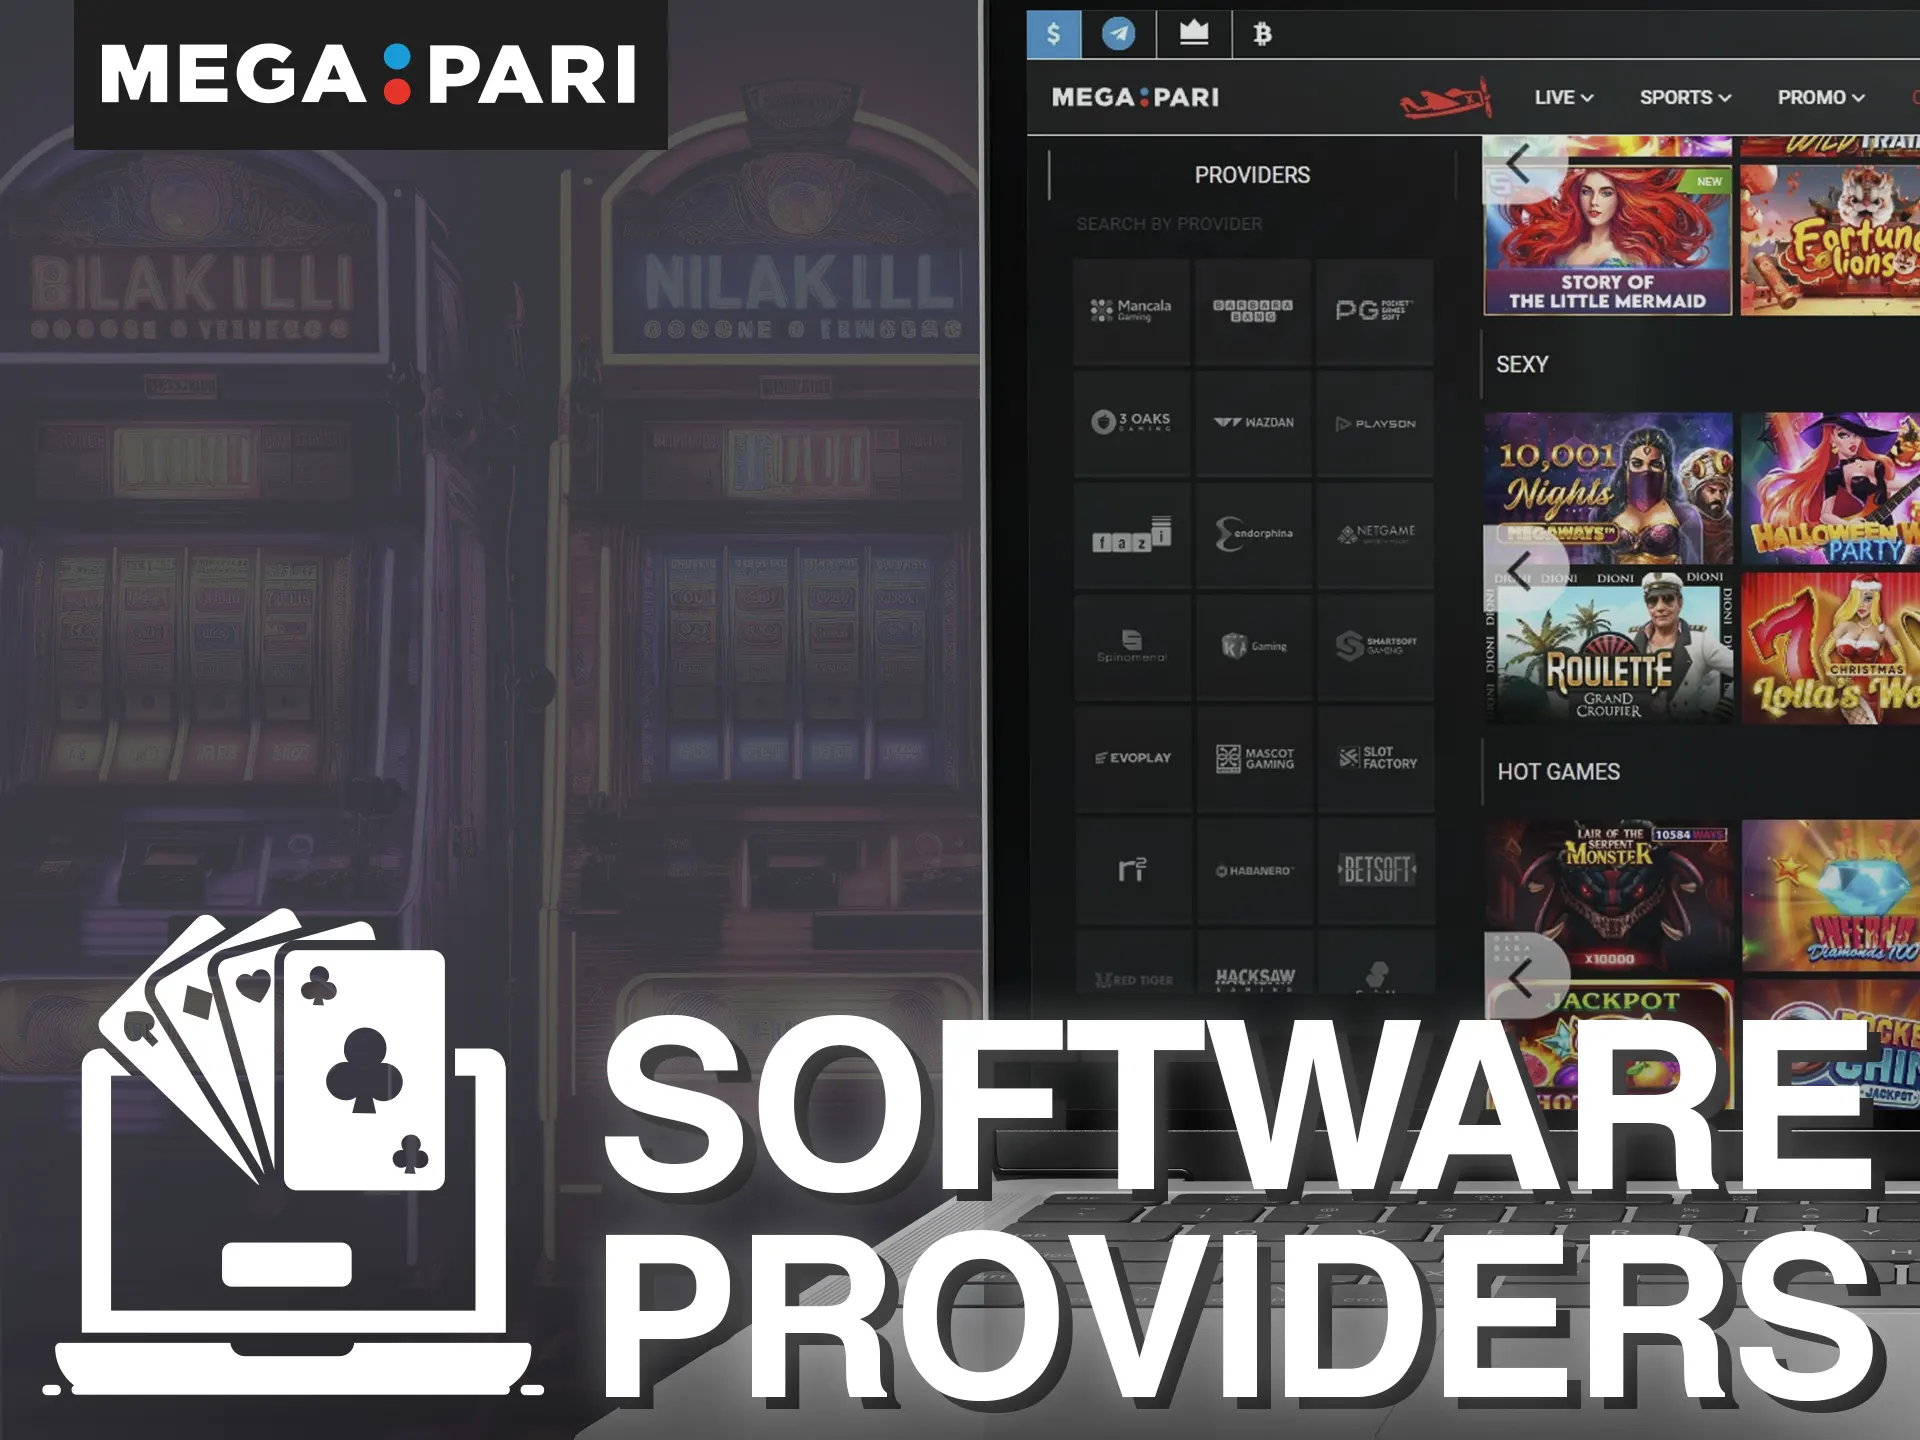 Slots, table games, live games are just a few of the many games offered by software providers.